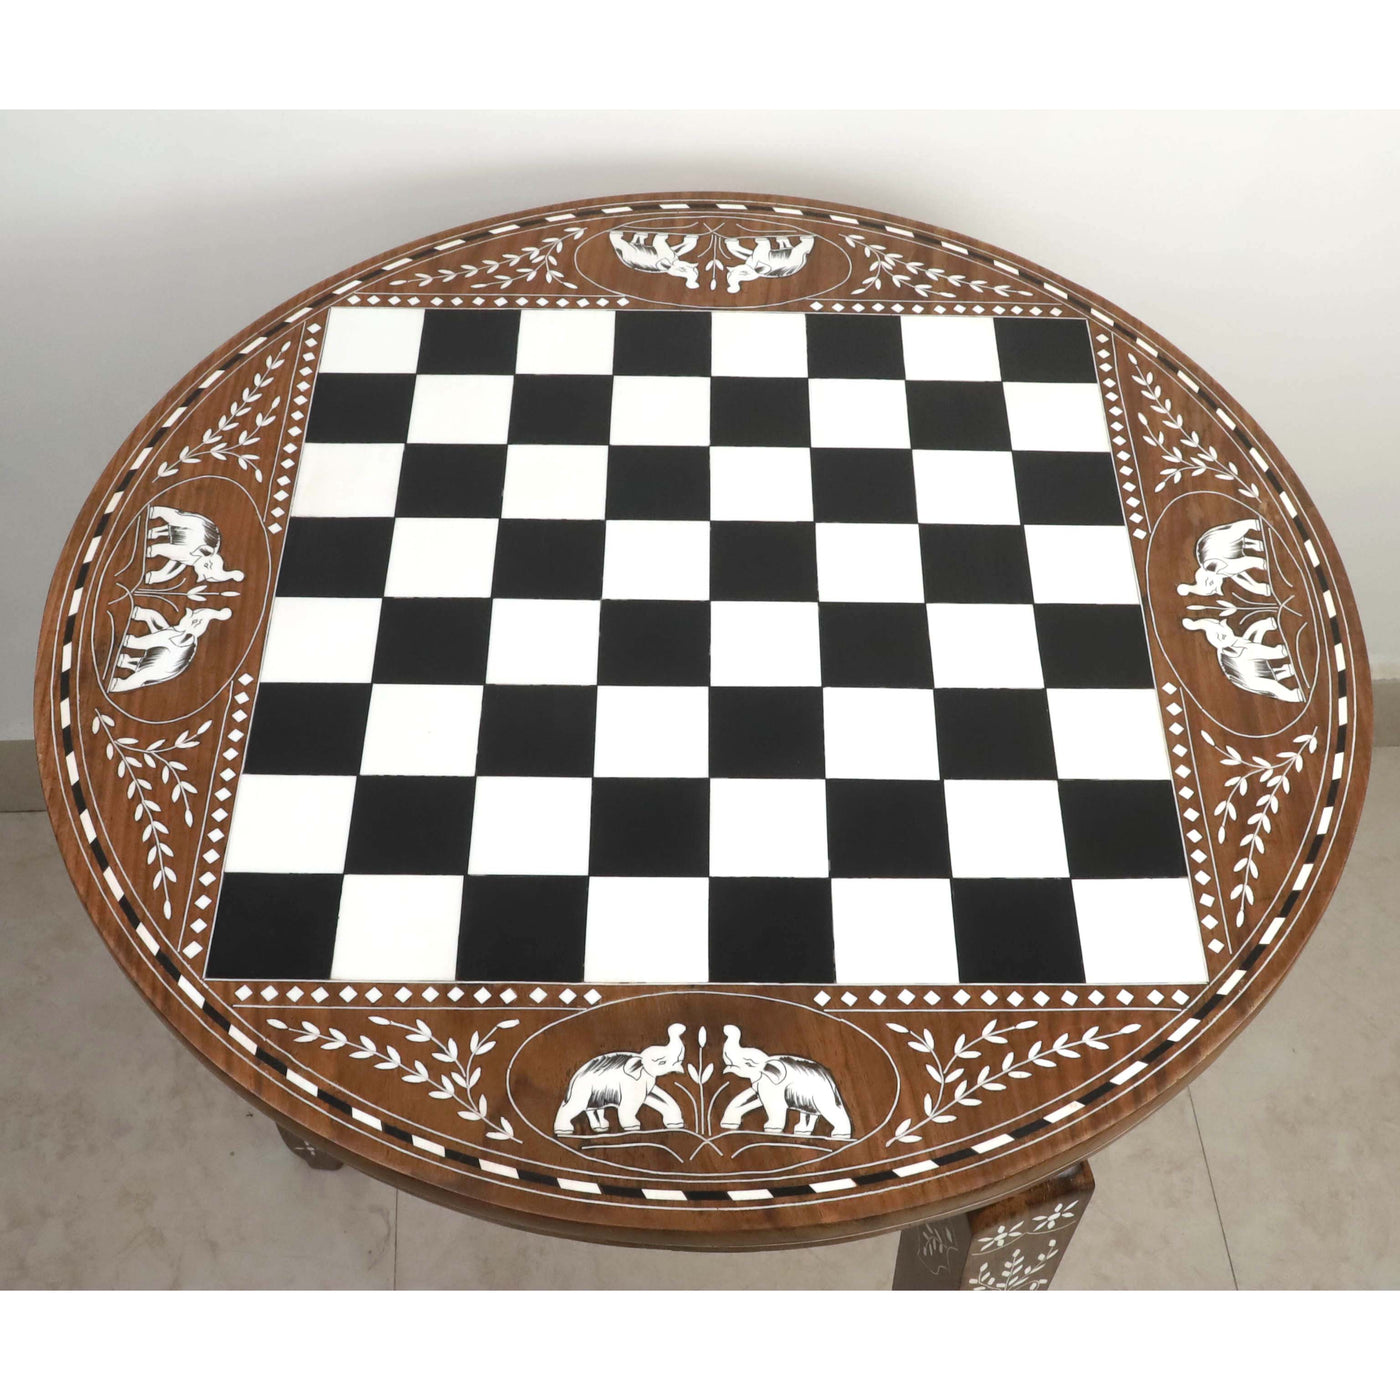 24" Boutique Luxury Round Chess Board Table -25" High- Golden Rosewood & Acrylic